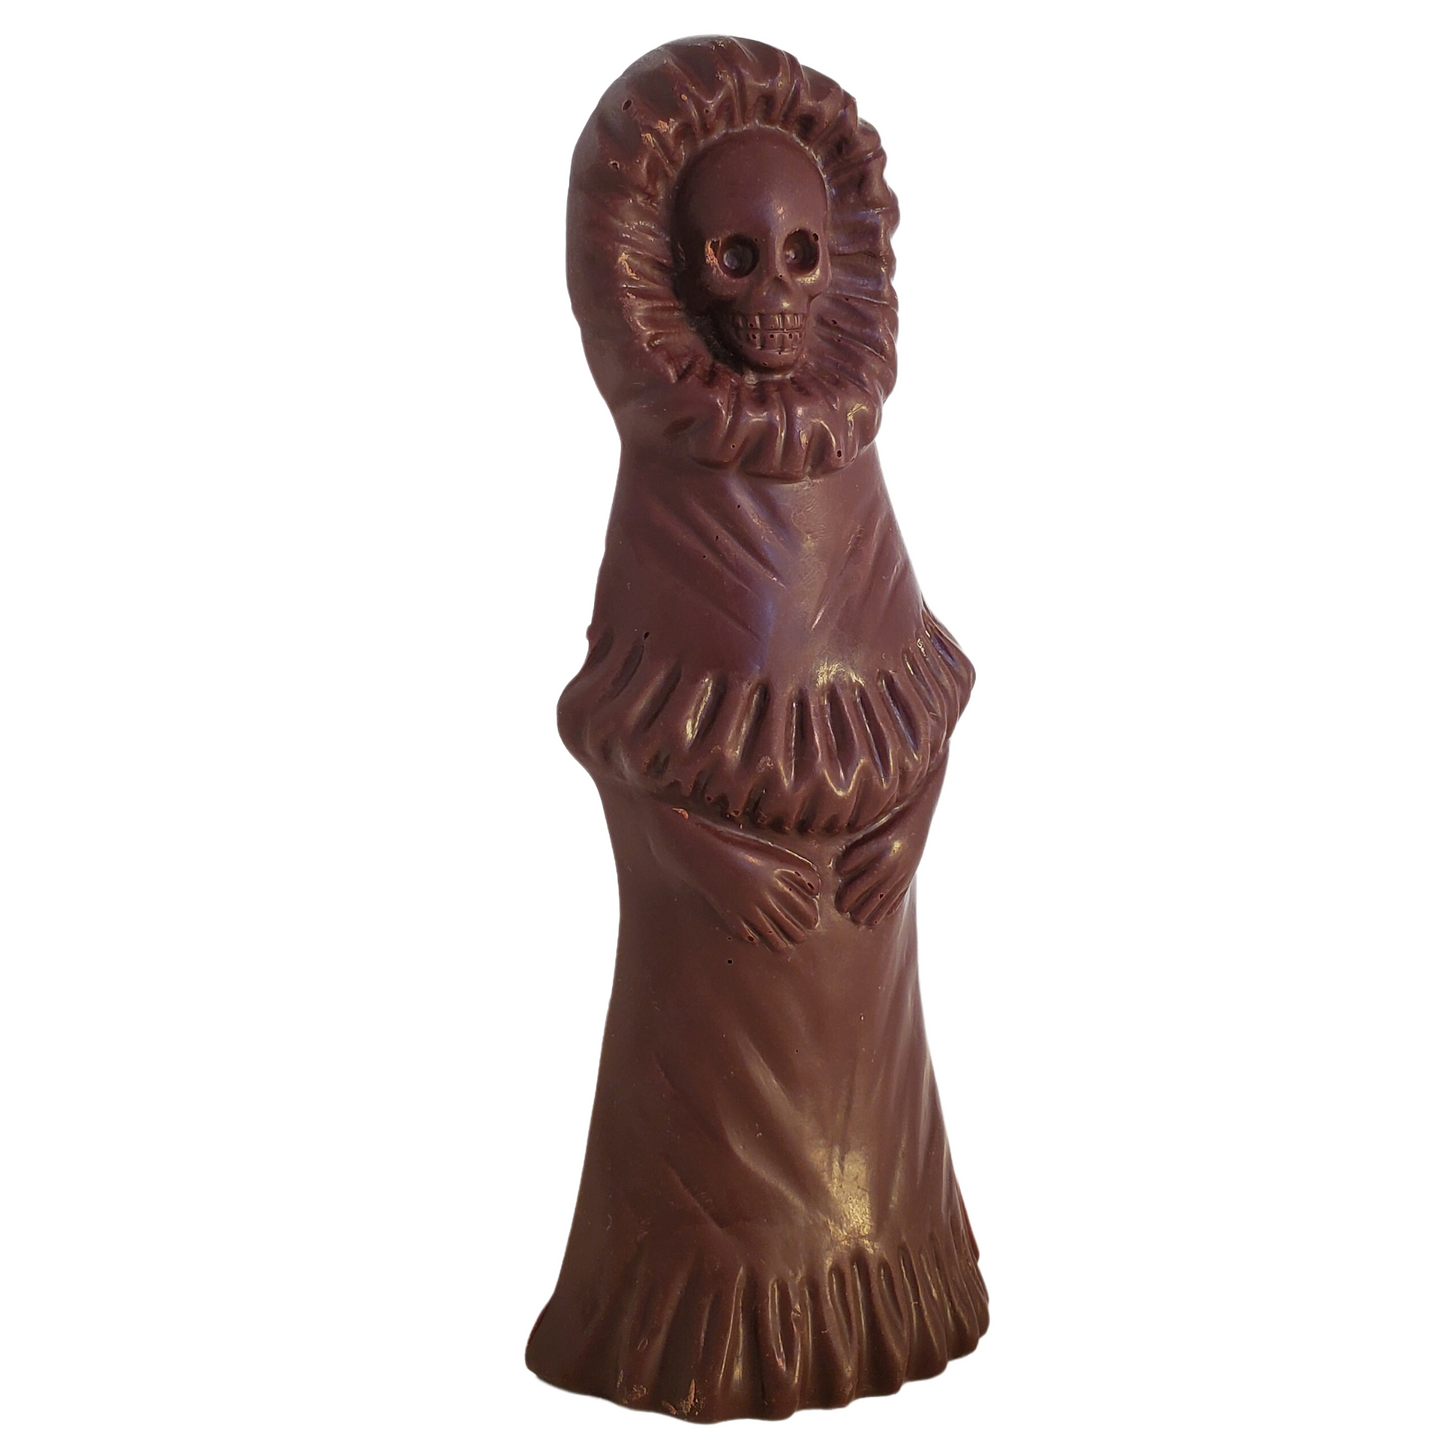 Dark chocolate figure with a skull face and cape.